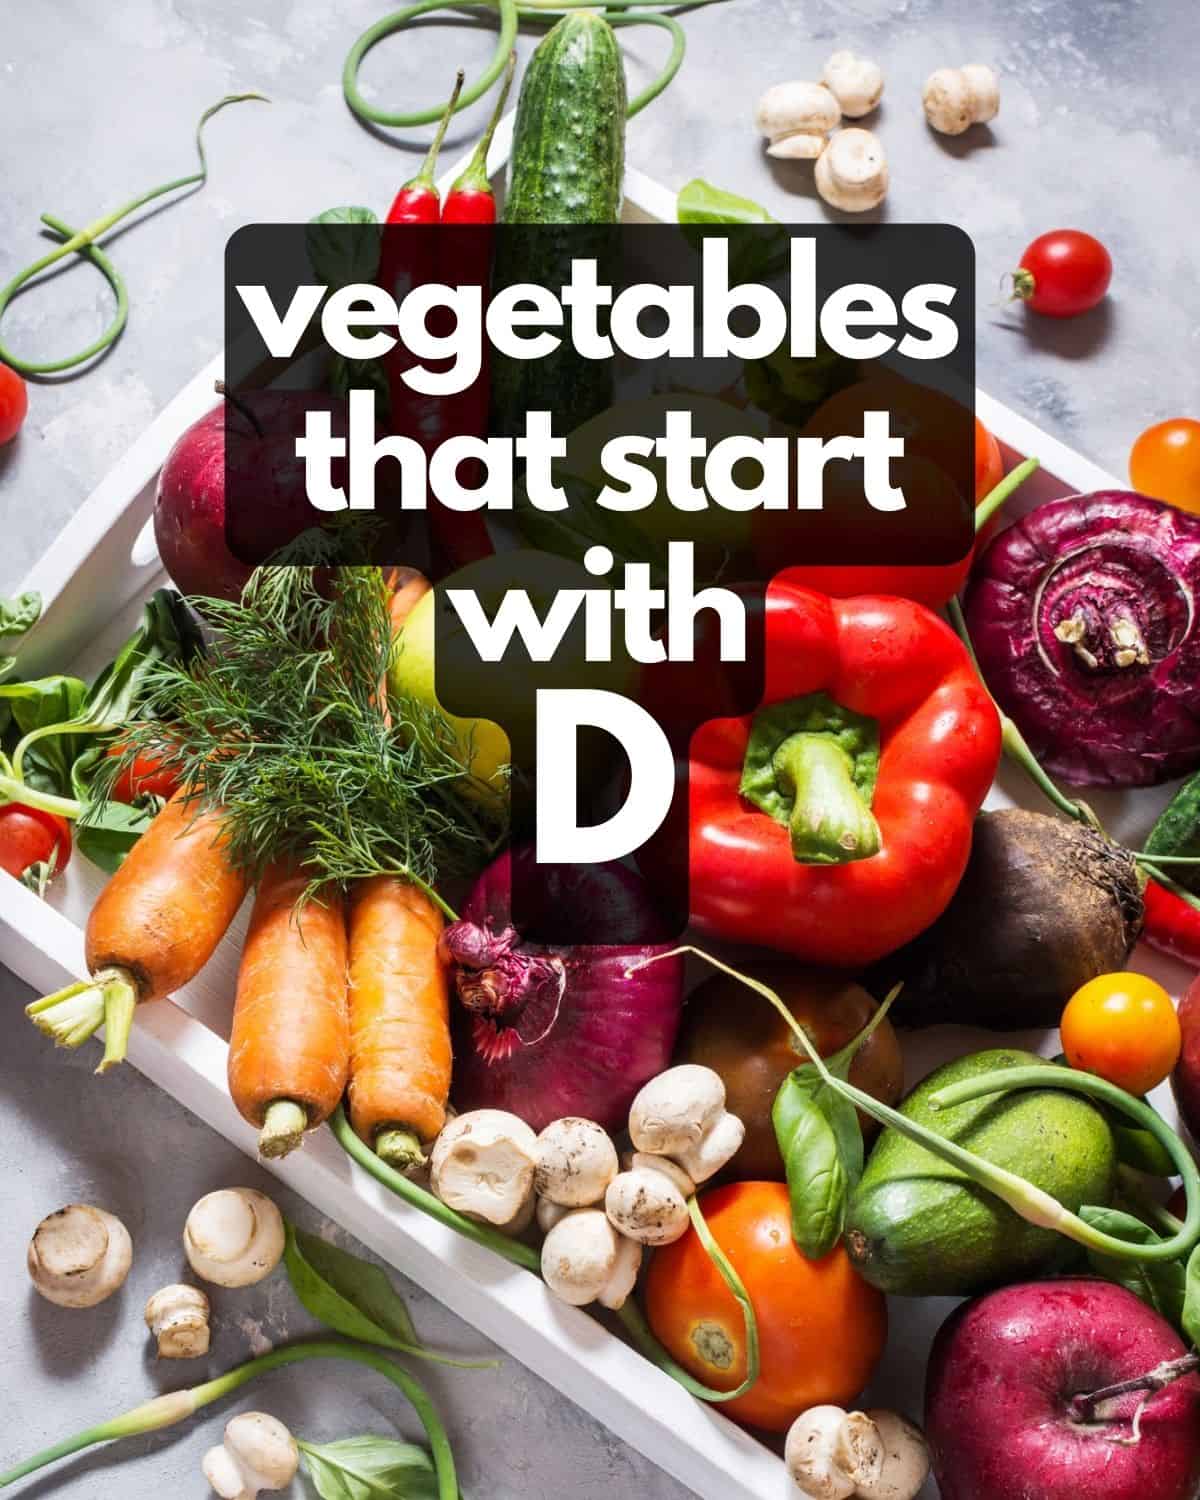 Table of vegetables, plus text: Vegetables that start with D.